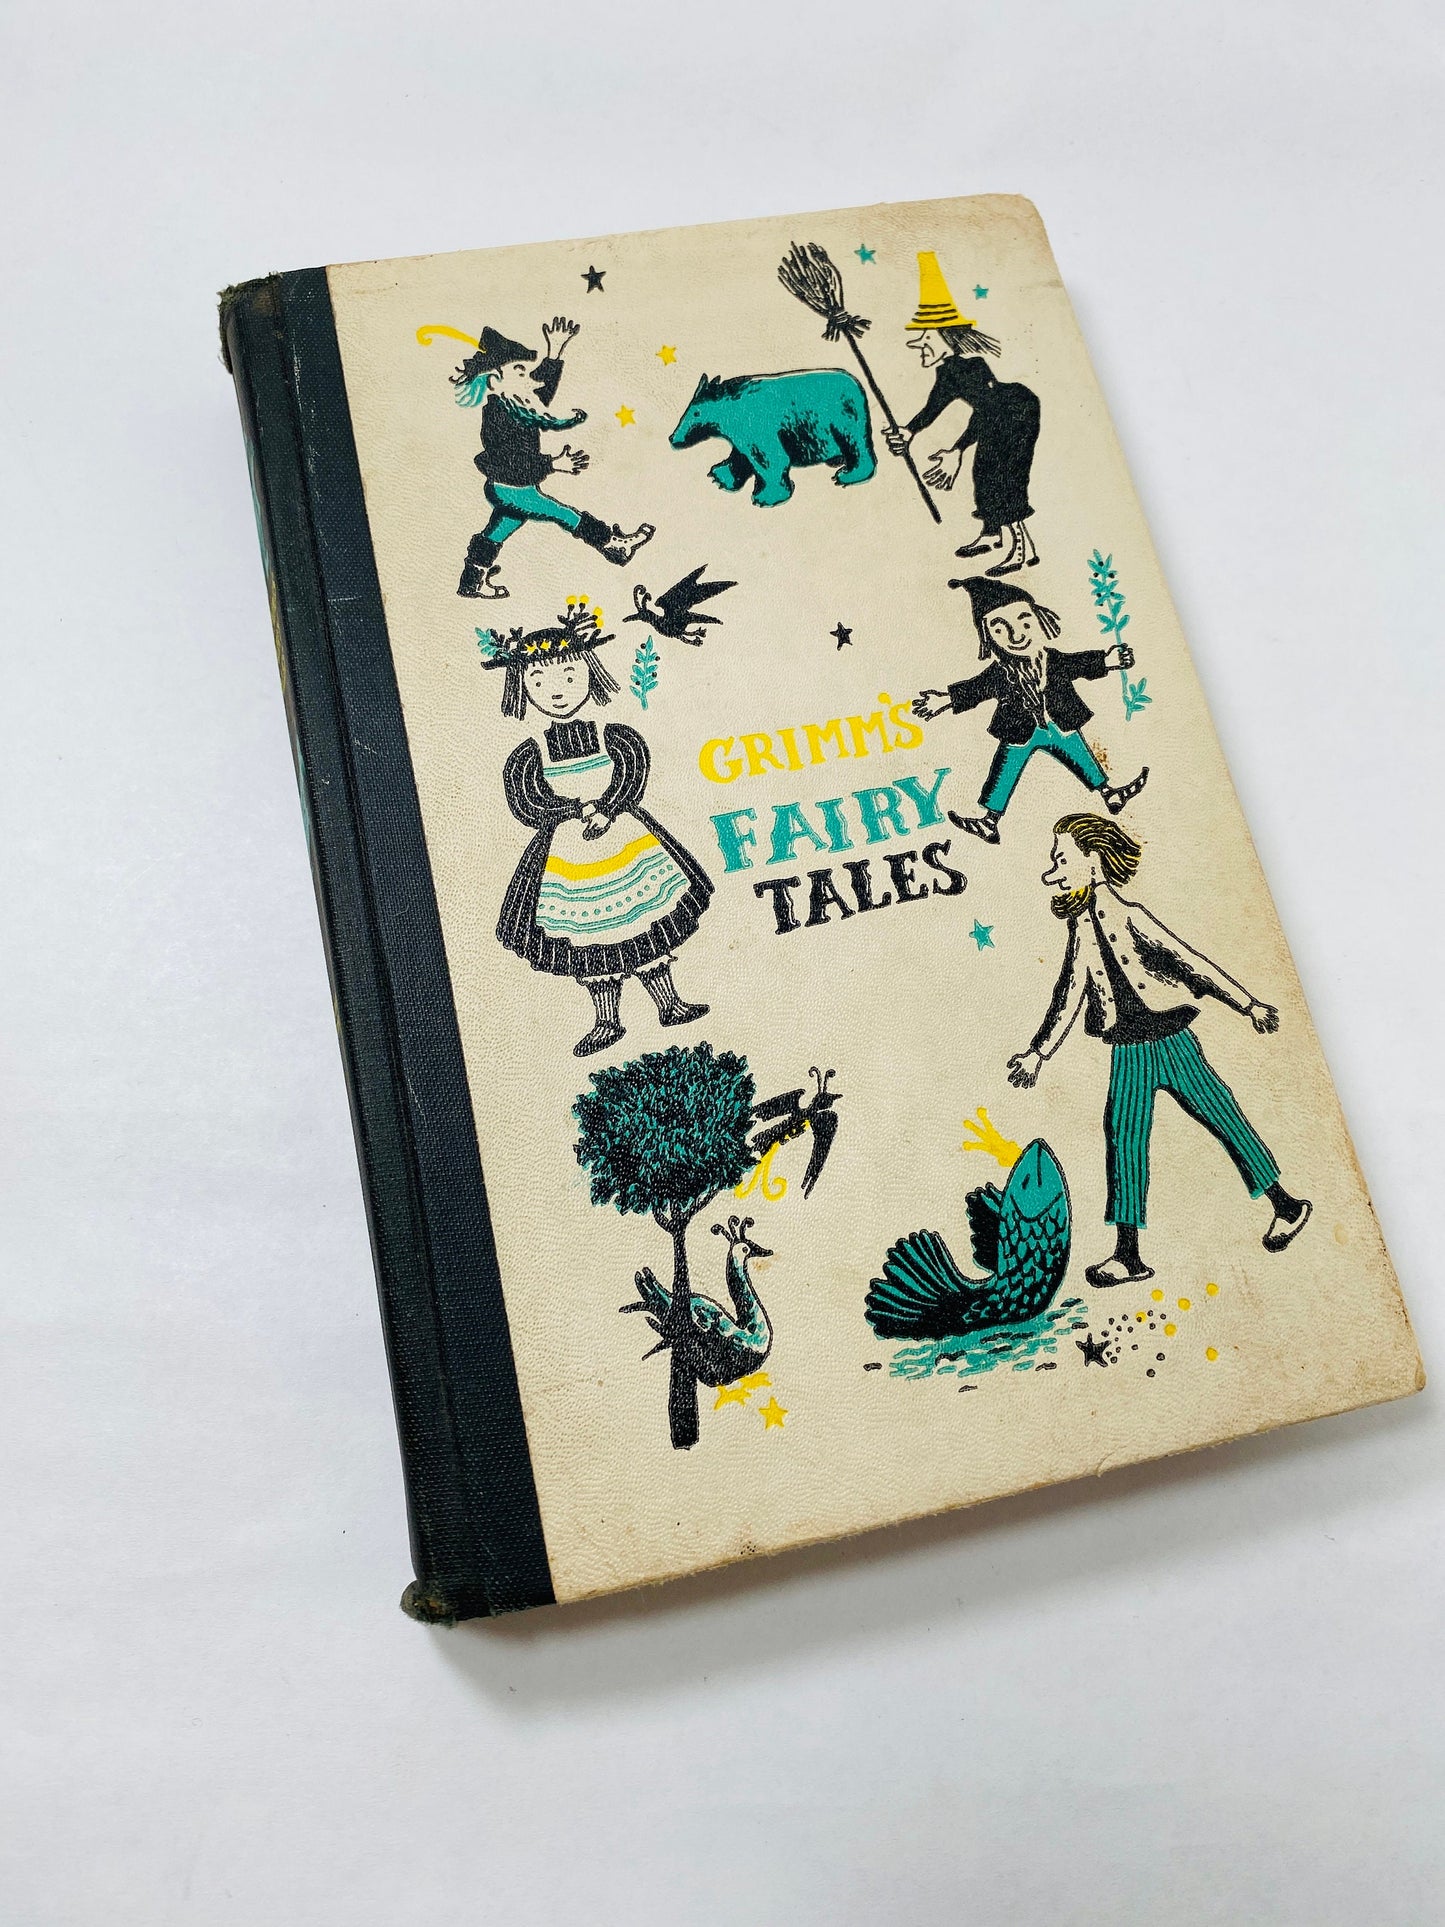 1954 Grimm's Fairy Tales book by the Grimm Brothers vintage Children's stories Junior Deluxe Editions